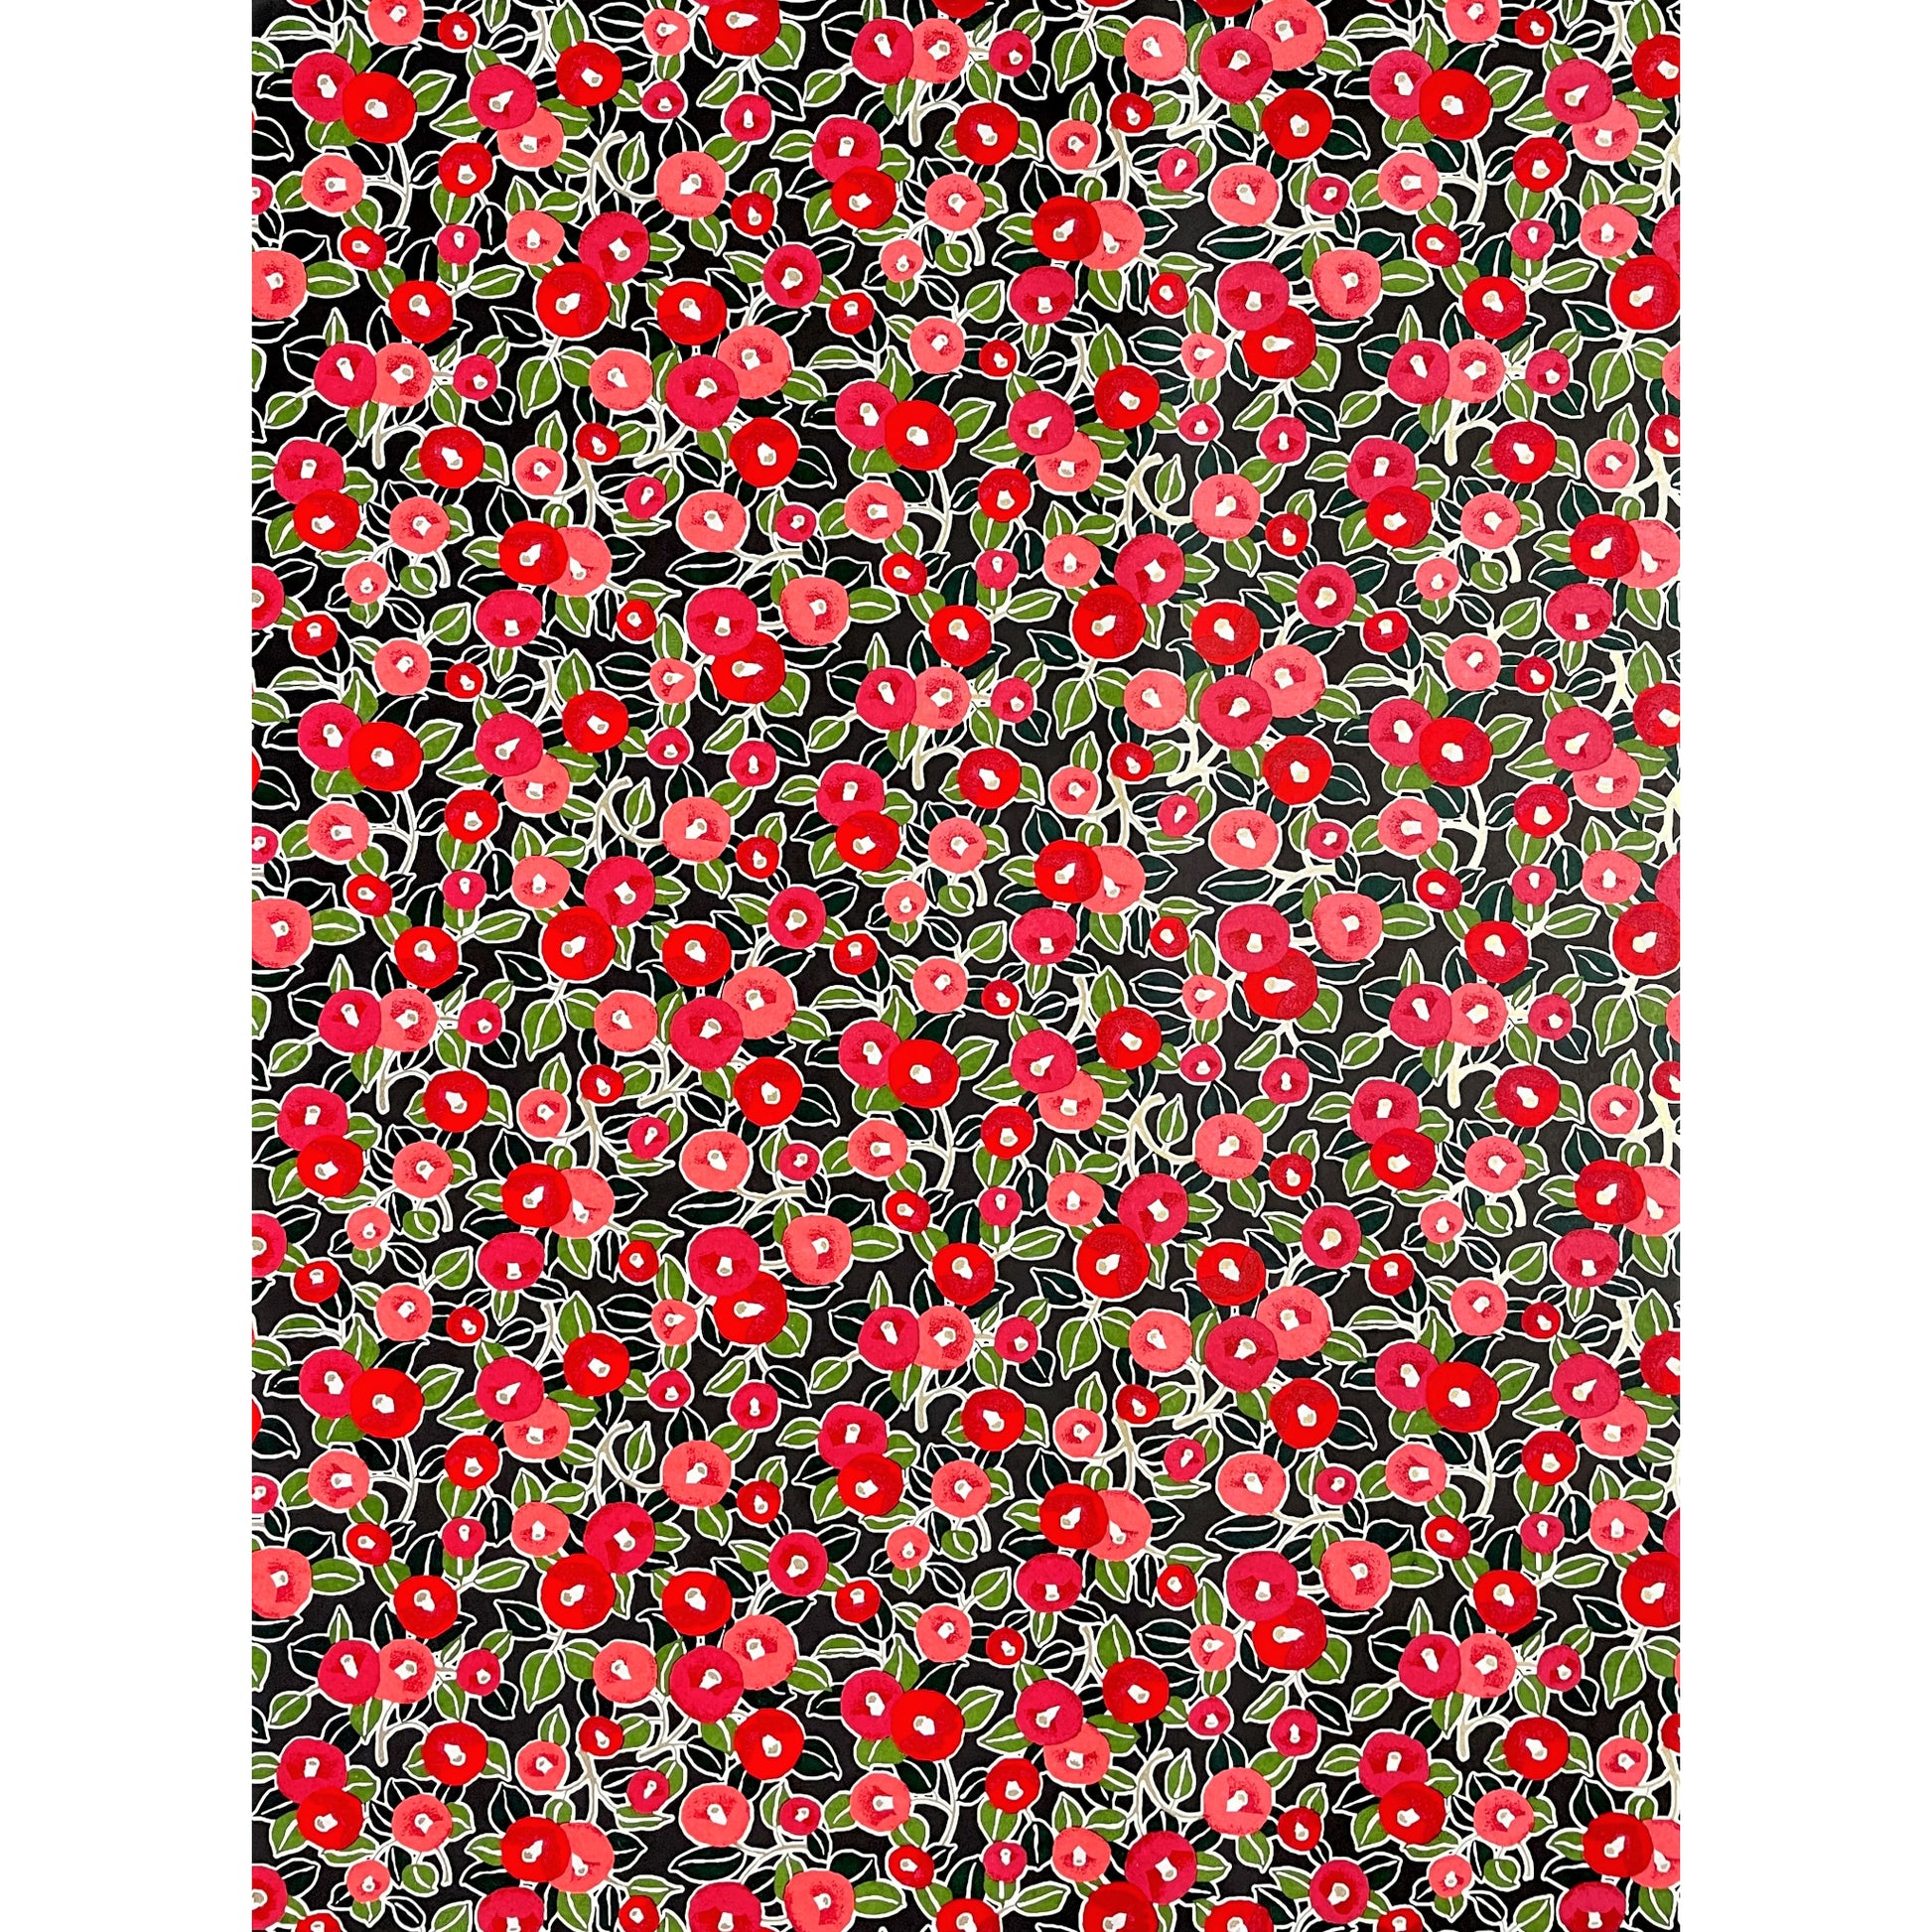 japanese silk-screen handmade paper with a design showing red and pink morning glory flowers and green leaves on black background, full sheet view